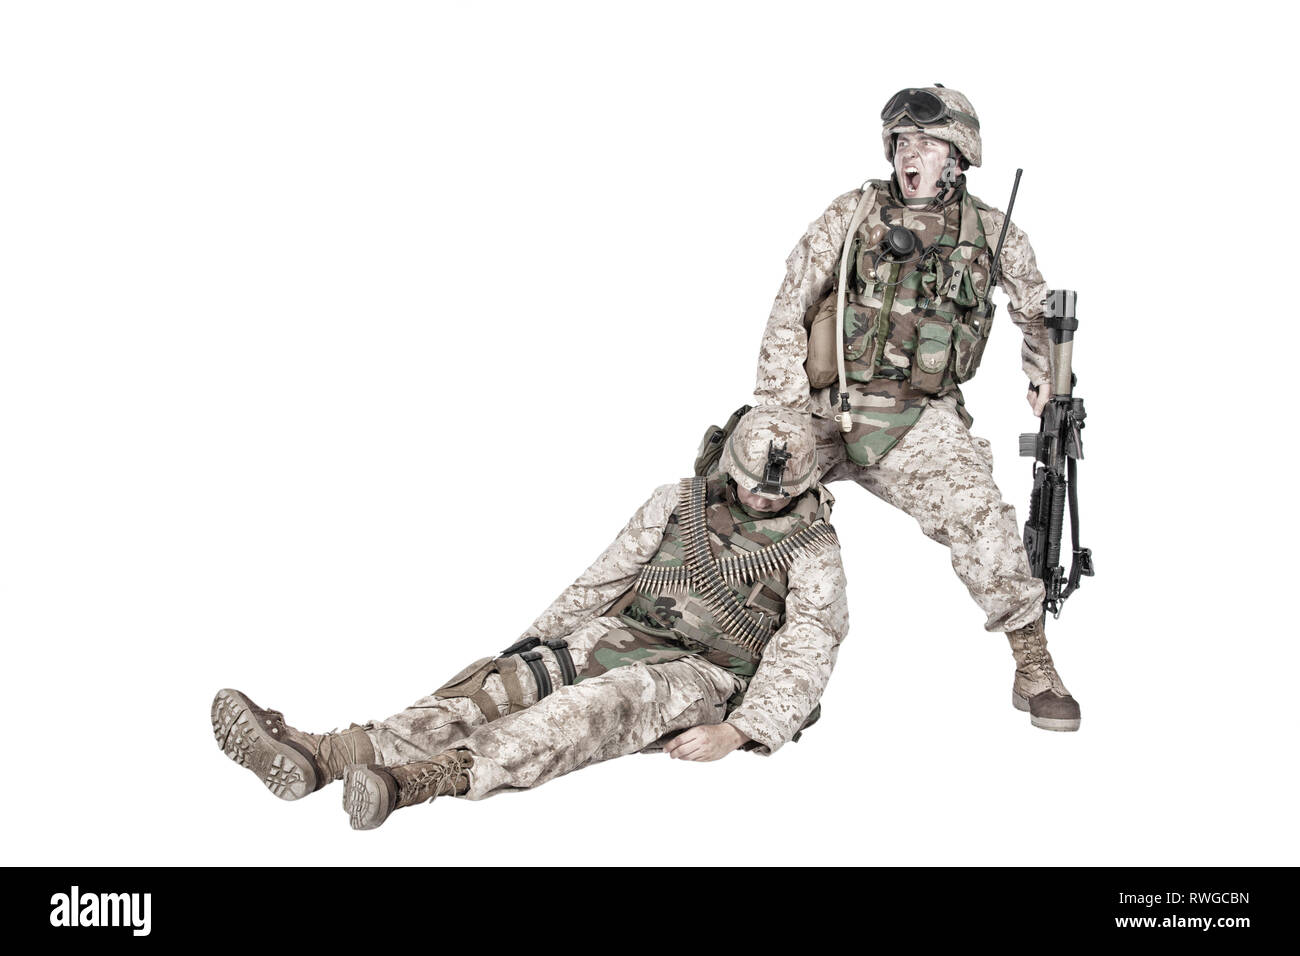 Soldier screaming and dragging an unconscious wounded comrade. Stock Photo